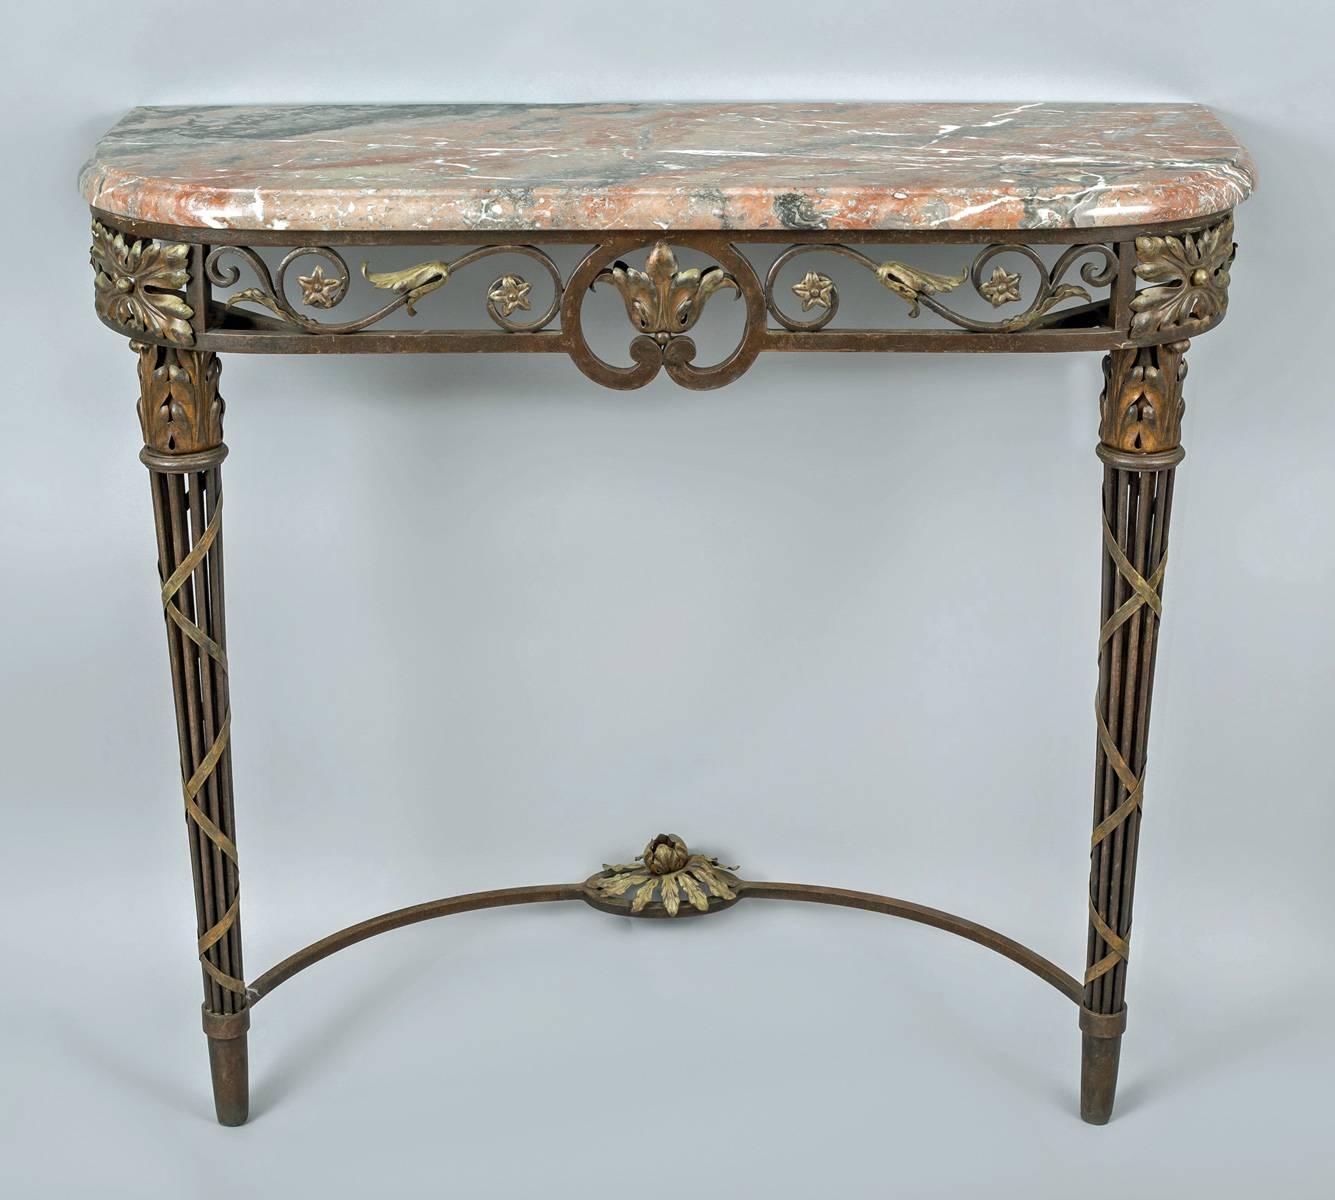 French wrought iron console table with breche marble D-shaped top above an open frieze with S- and C-shaped scrolls and acanthus leaves, the cluster open column legs wrapped with ribbon.  Legs joined at bottom with a concave shaped stretcher